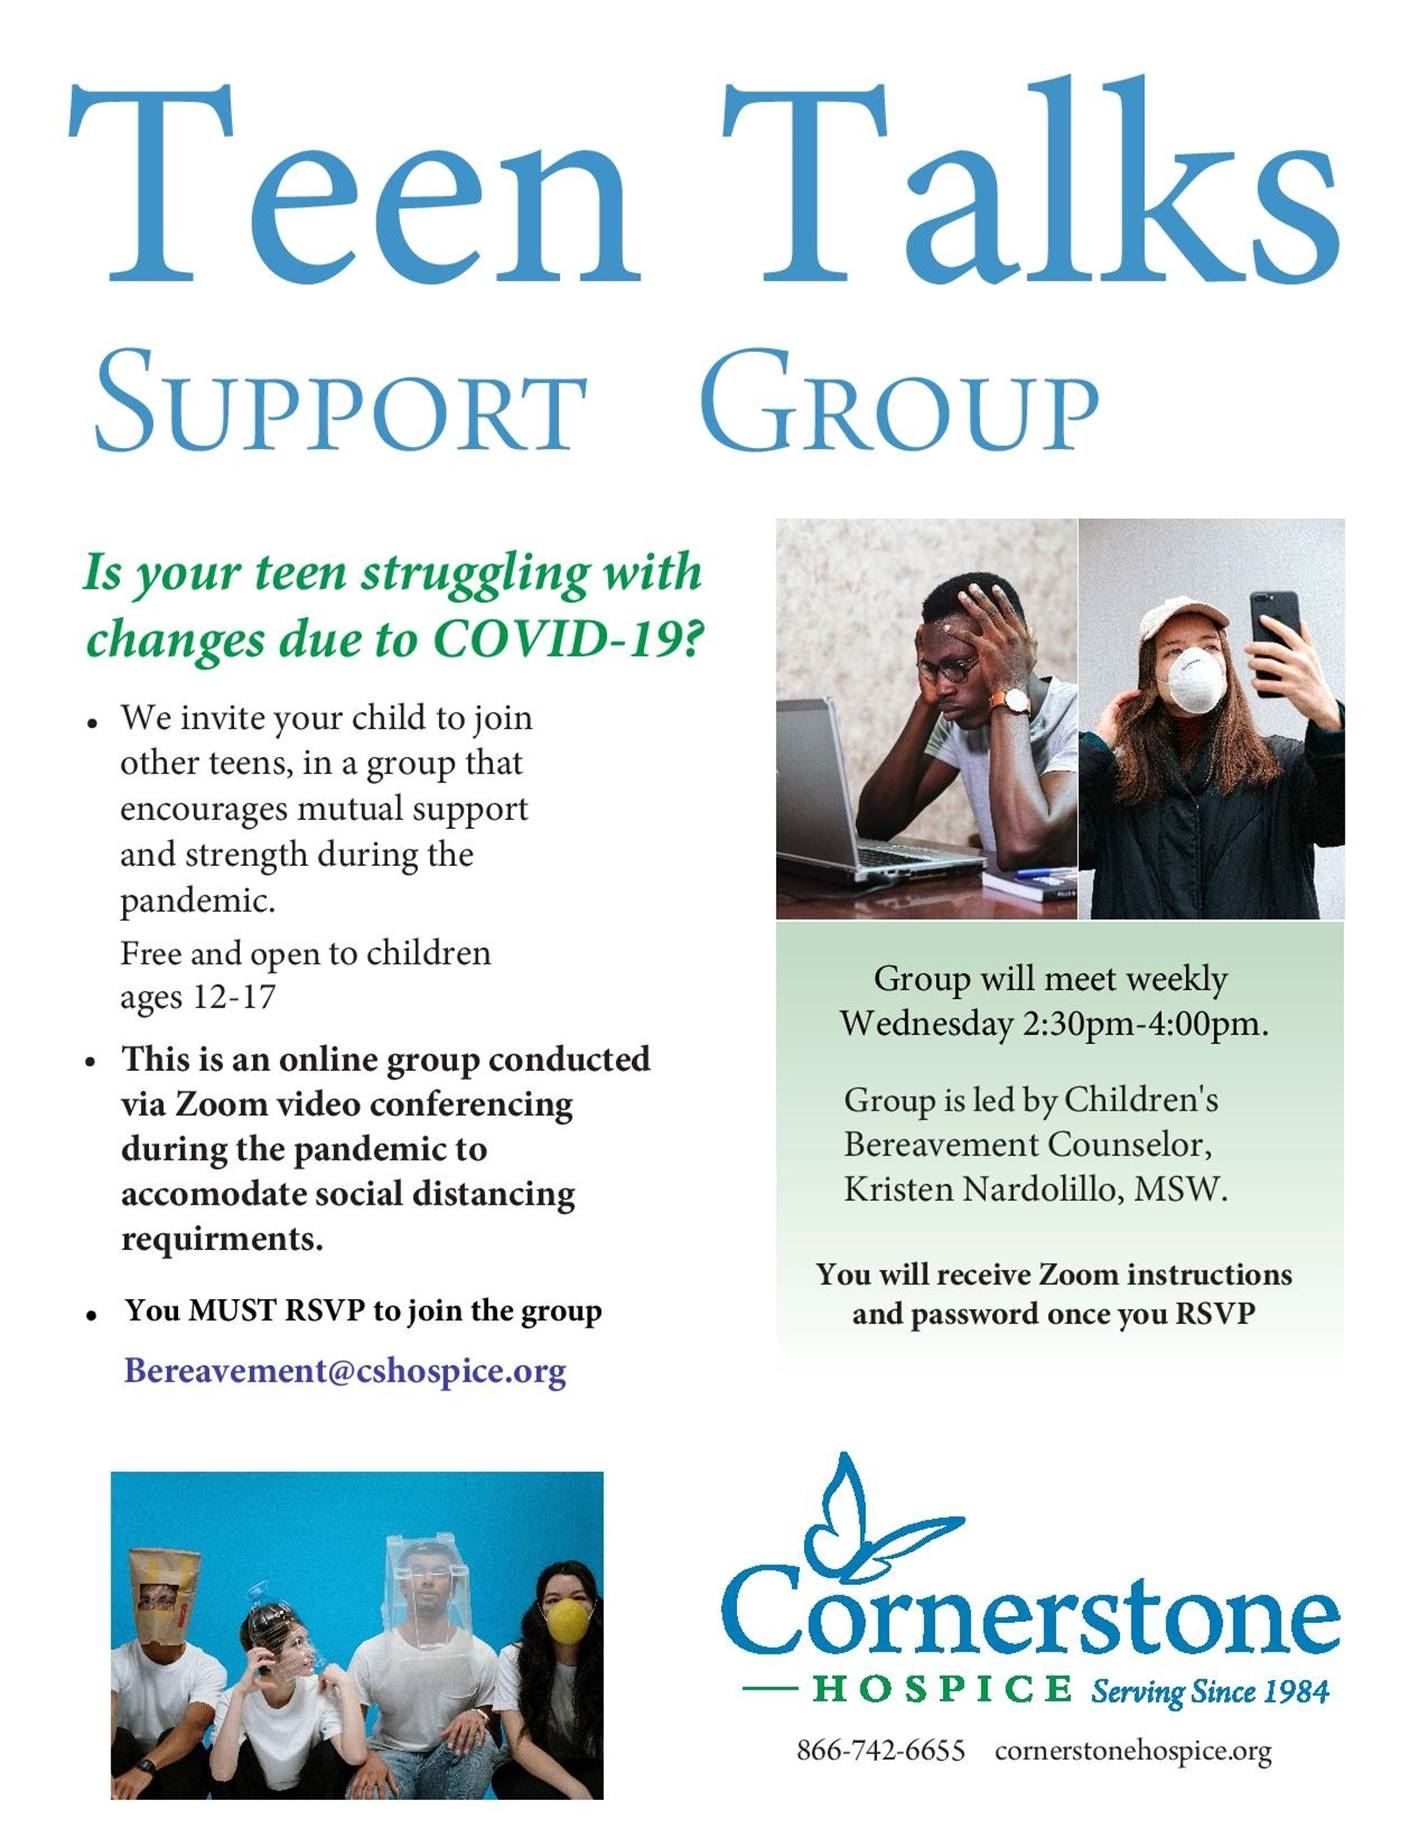 Teen Talks Support Group Flyer. Is your teen struggling with changes due to COVID-19? Contact bereavement@cshopice.org